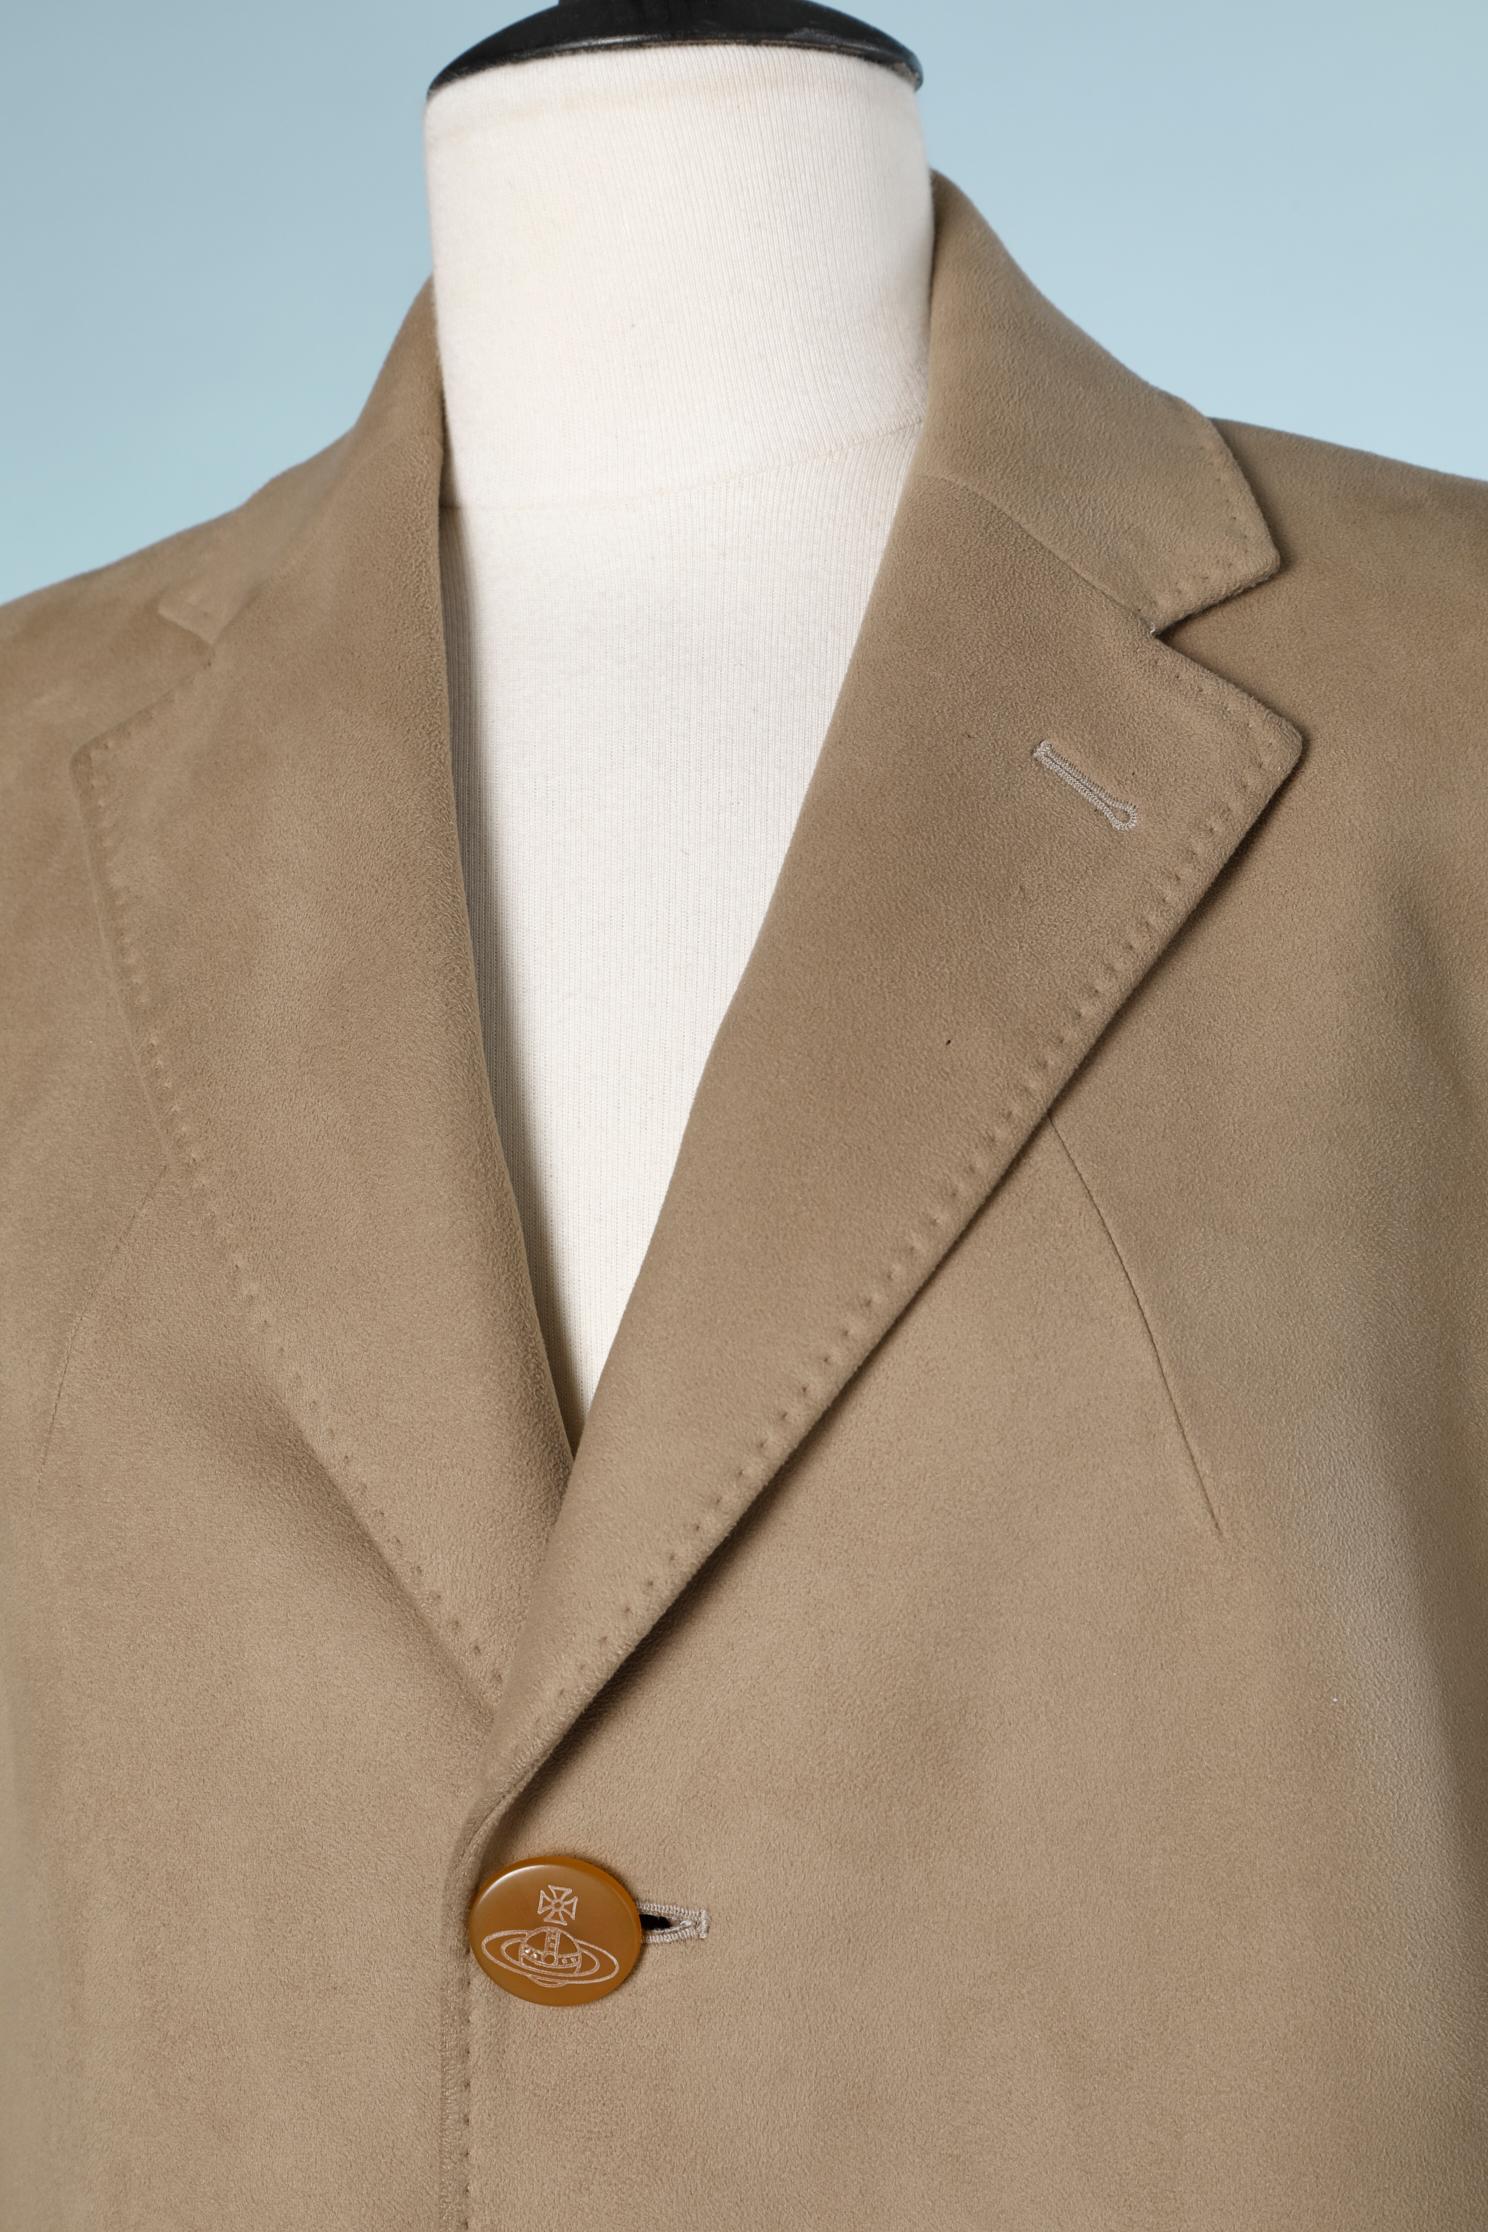 Single breasted coat  in suedine with branded buttons. Main fabric composition: 95% polyester, 5% polyurethane. 
Branded buttons, shoulder-pads , cut-work on the back of the shoulders, top-stitched edges. 2 outside pockets and 2 inside pockets.